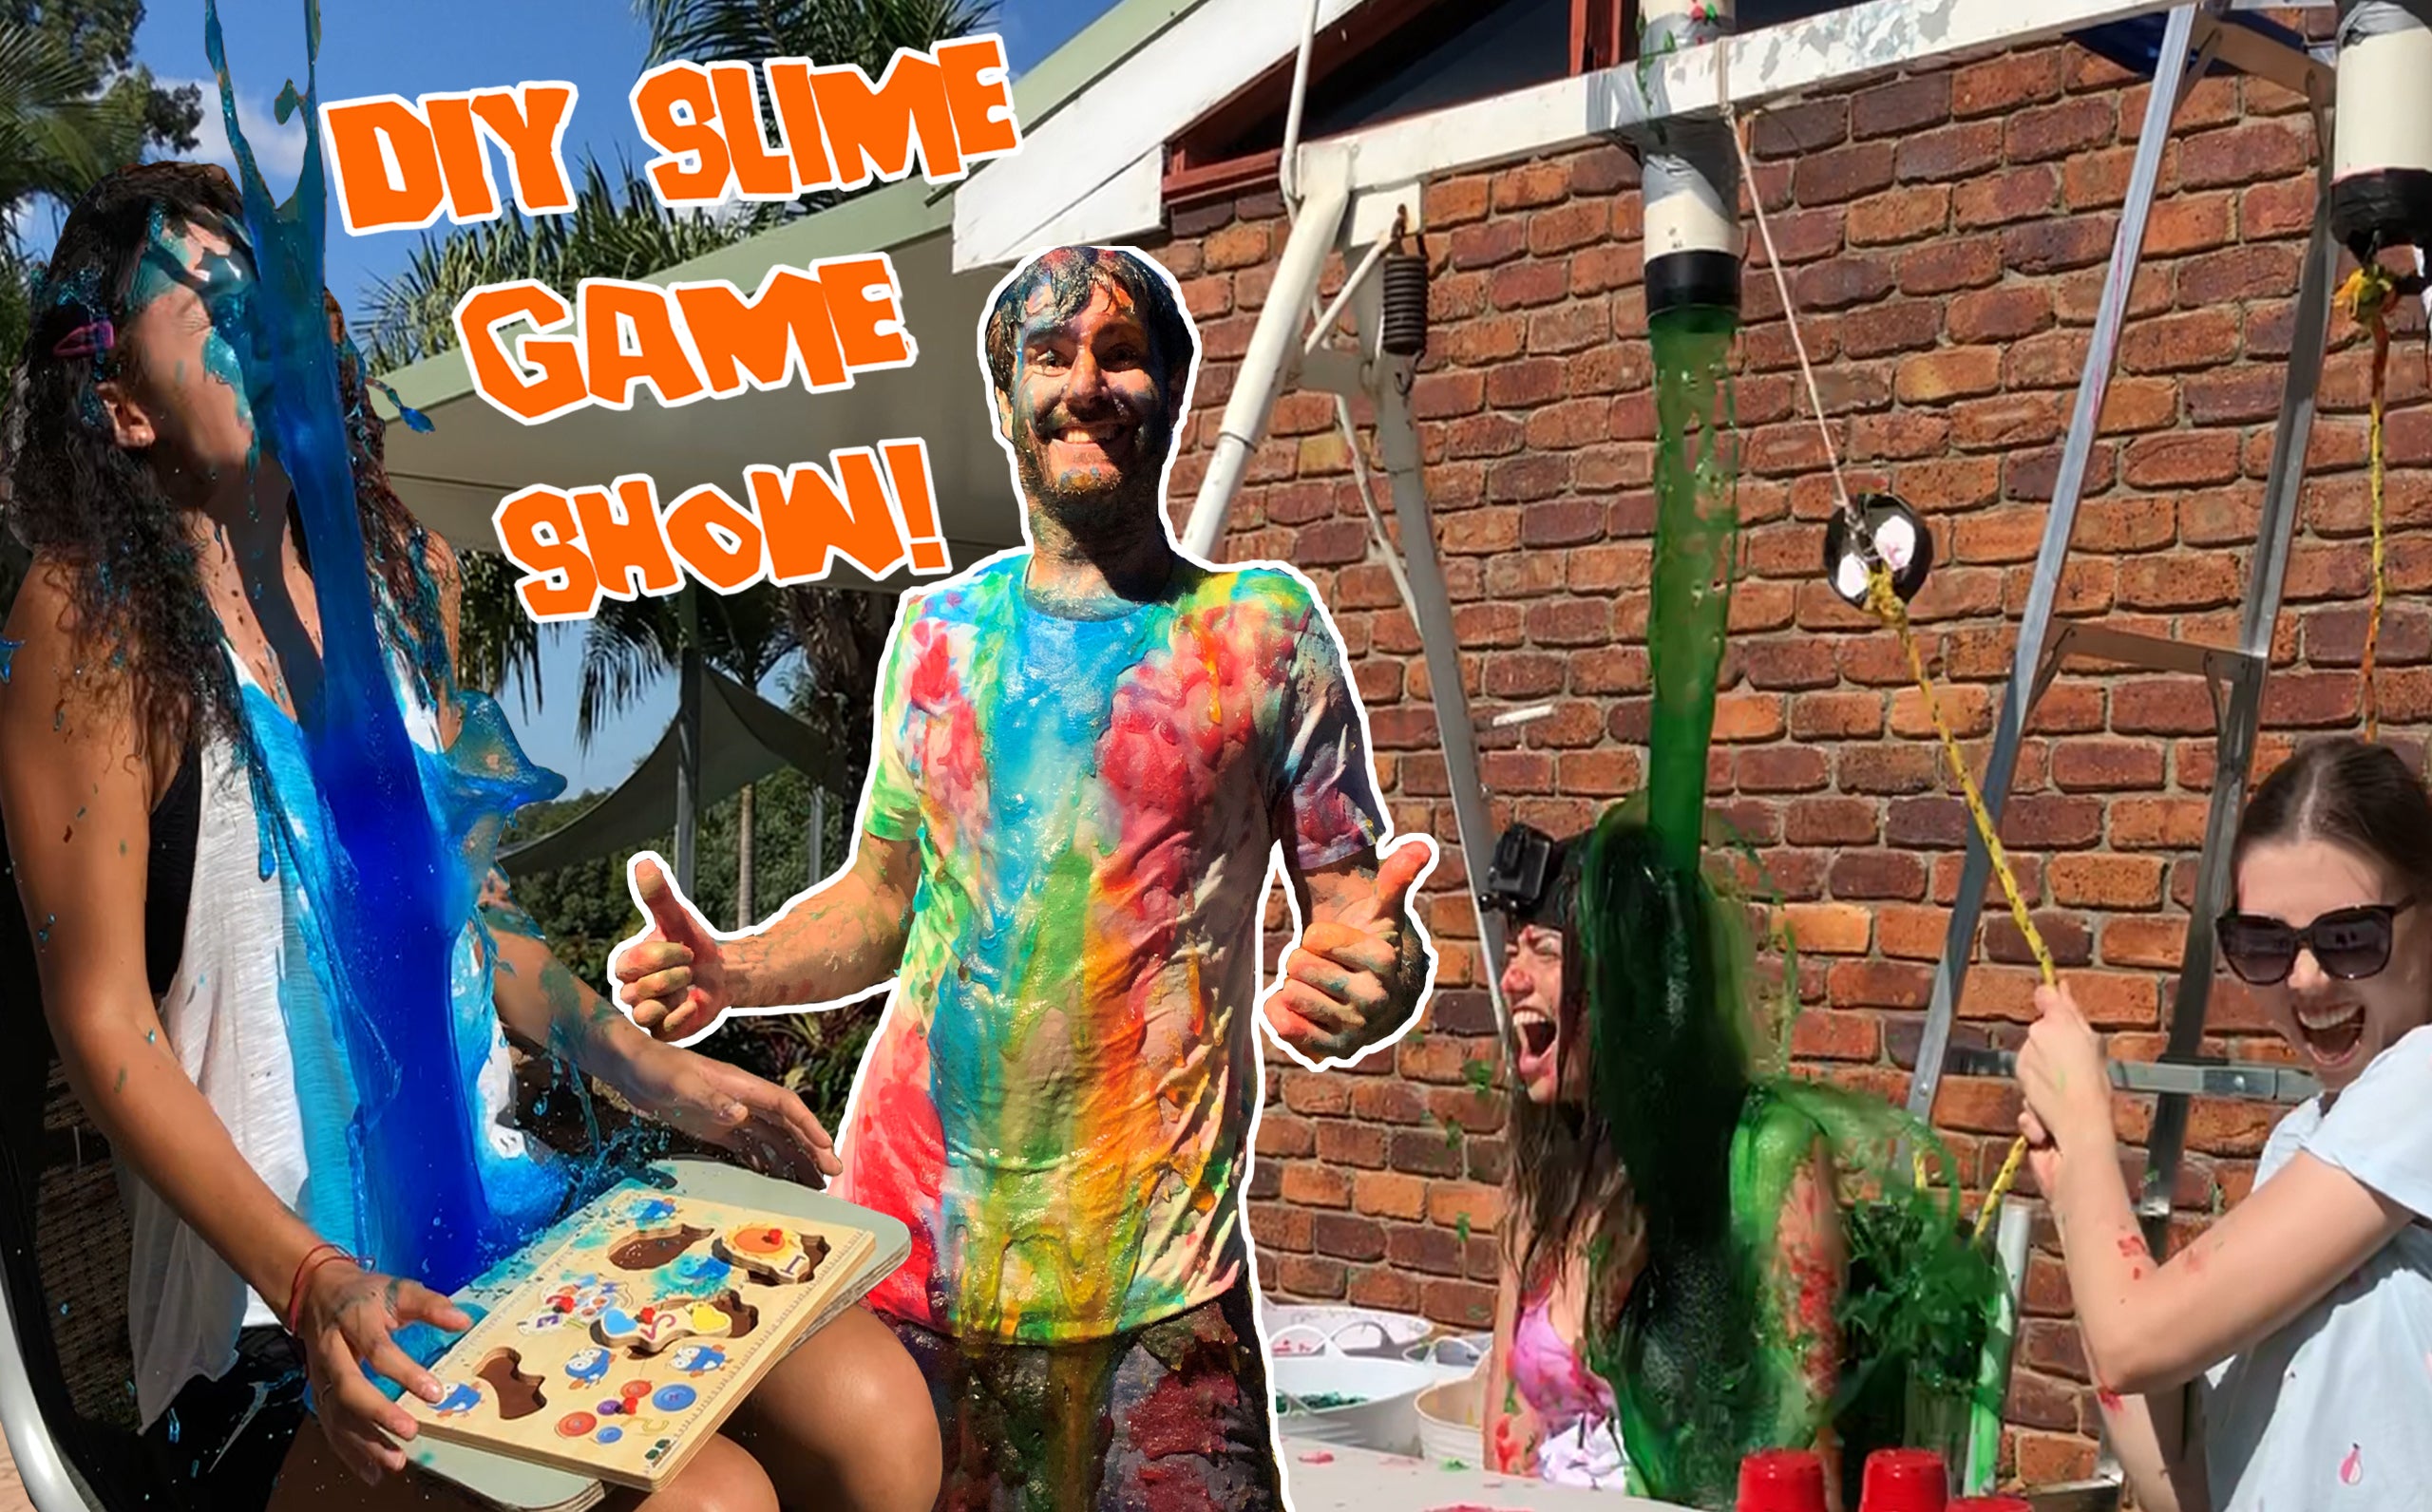 How to host a slime party? – PARTY GOAT